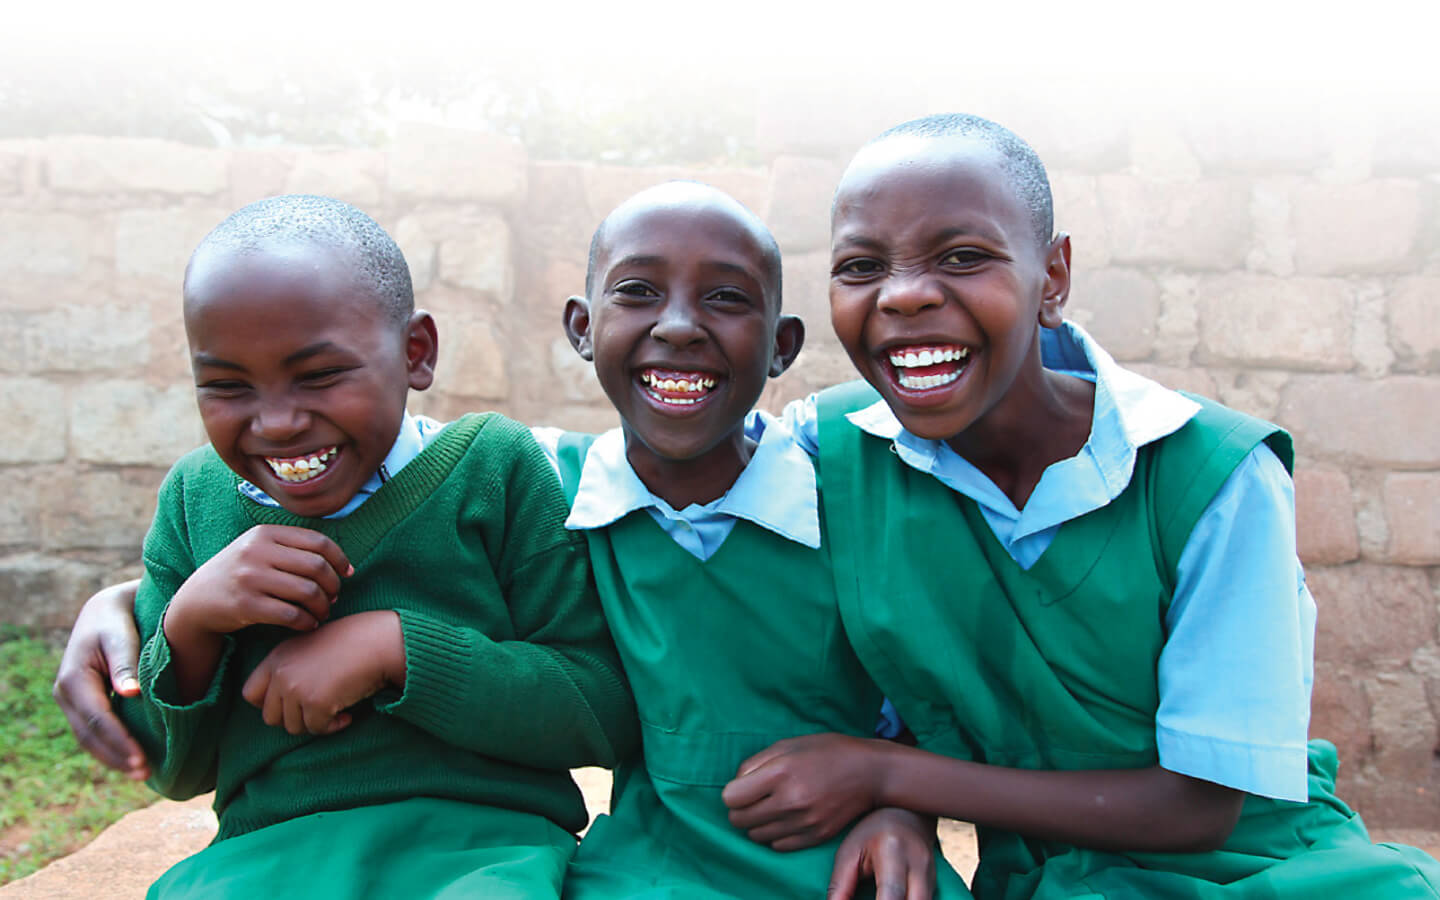 Young girls in Kenya find friendship and safety in Kids Alive school programs